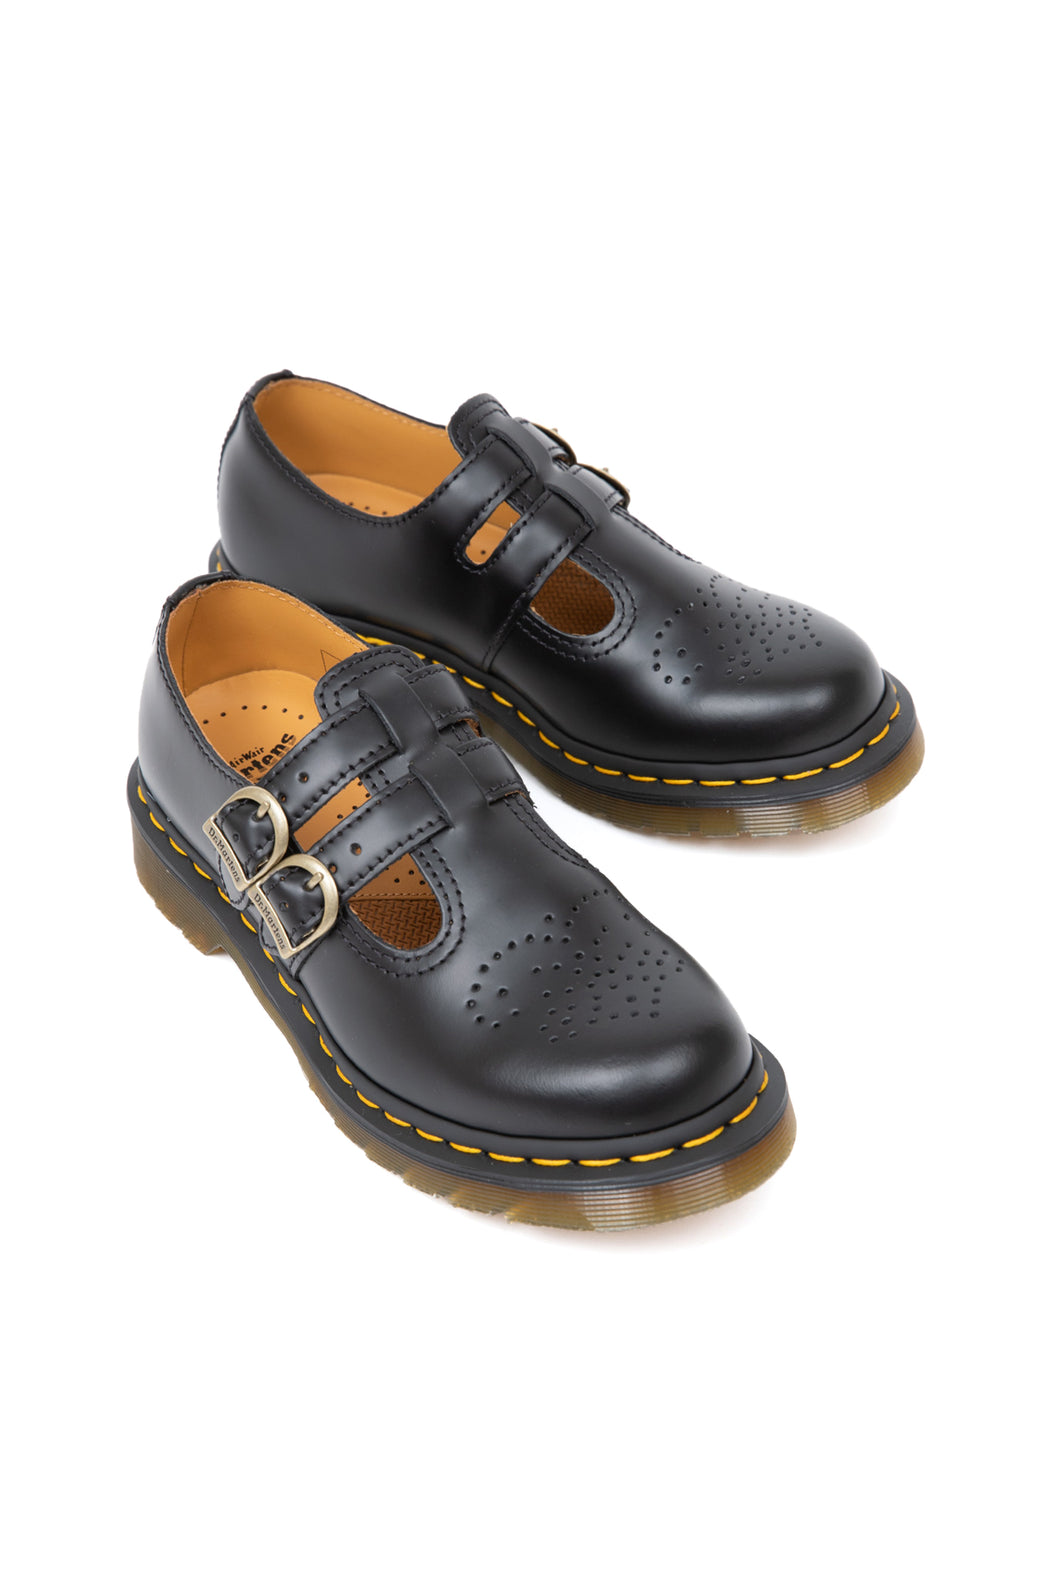 Dr-Martens-8065-Smooth-Leather-Mary-Jane-Shoes-Black